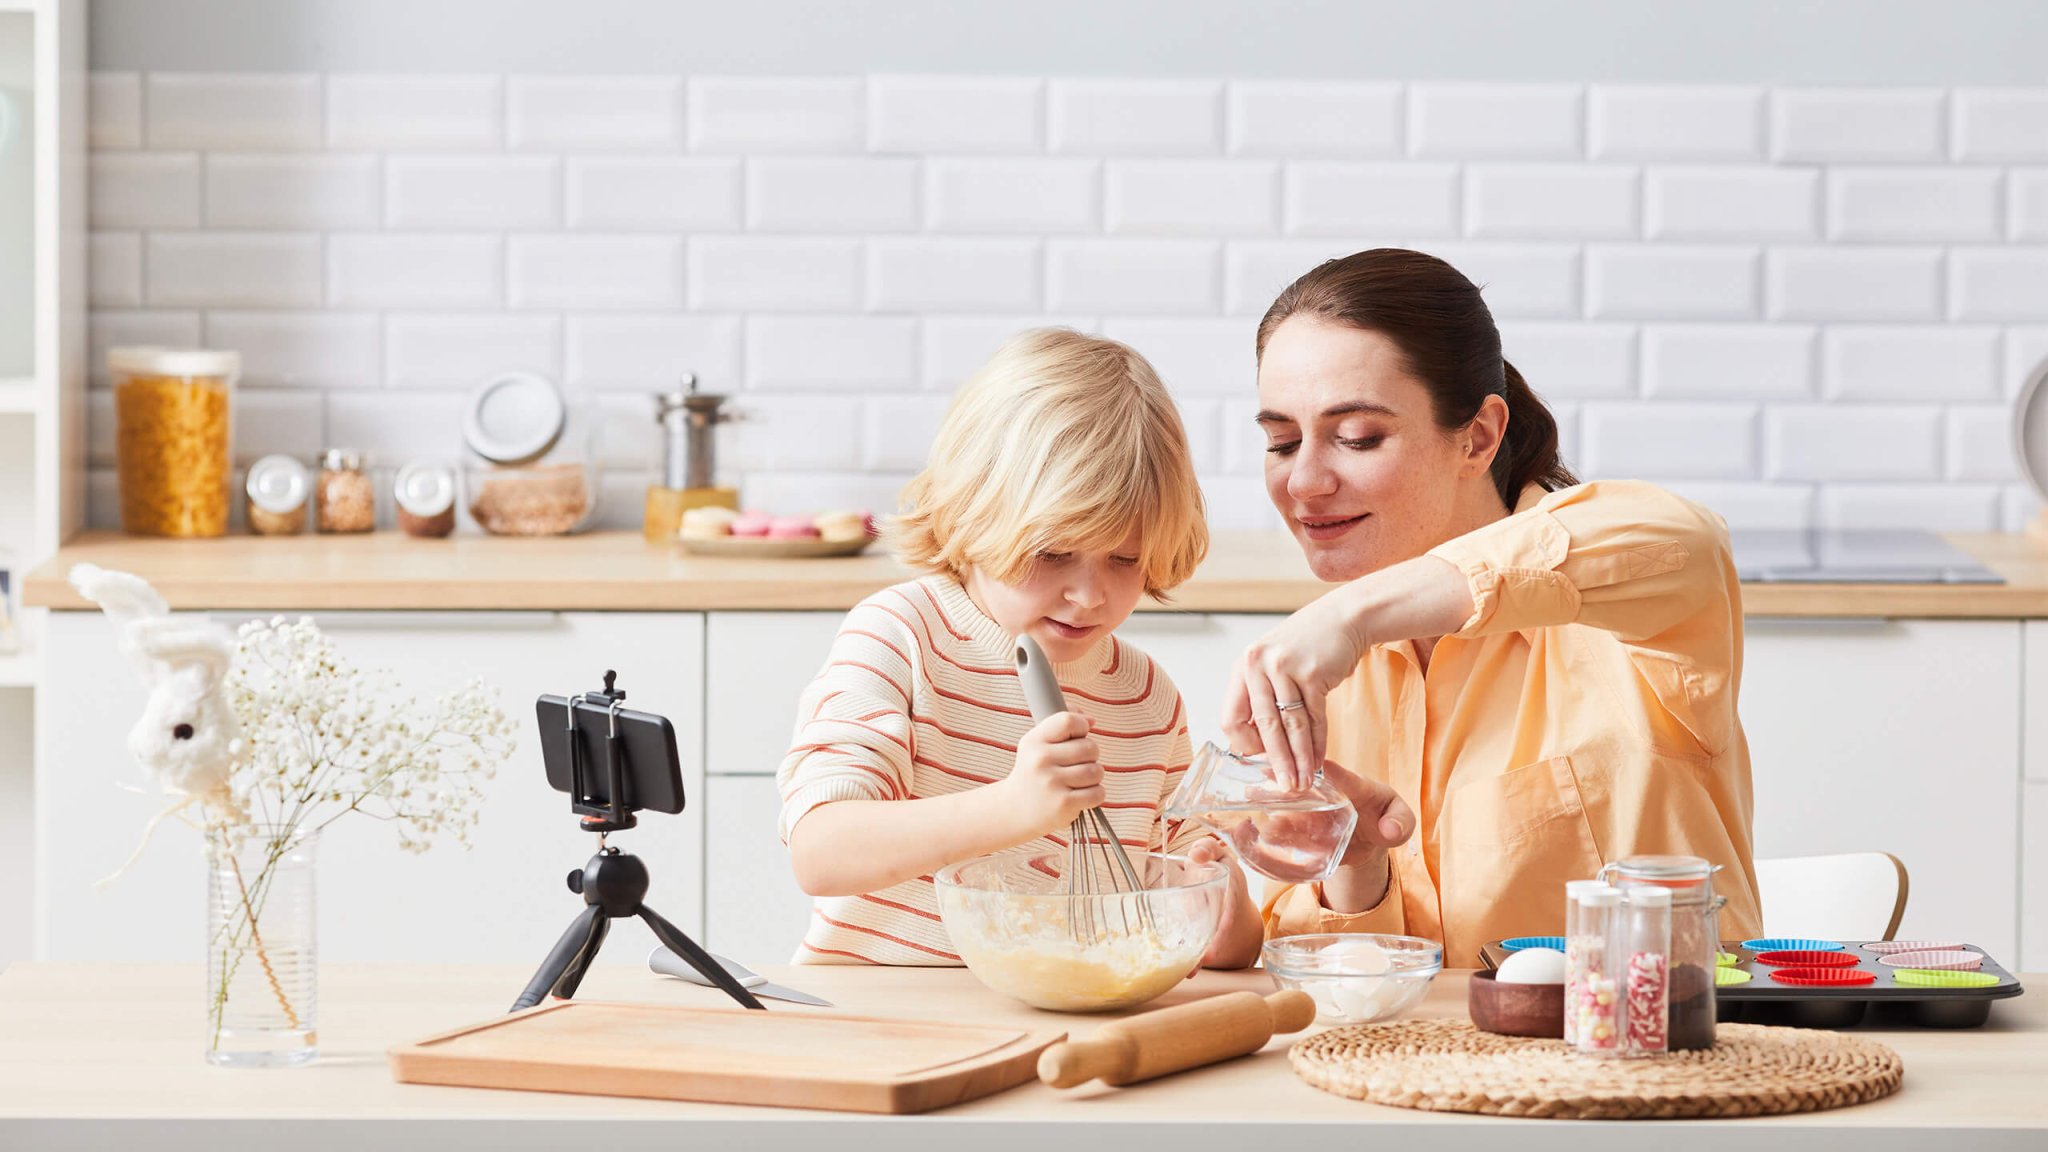 Seven tips for capturing engaging video with kids